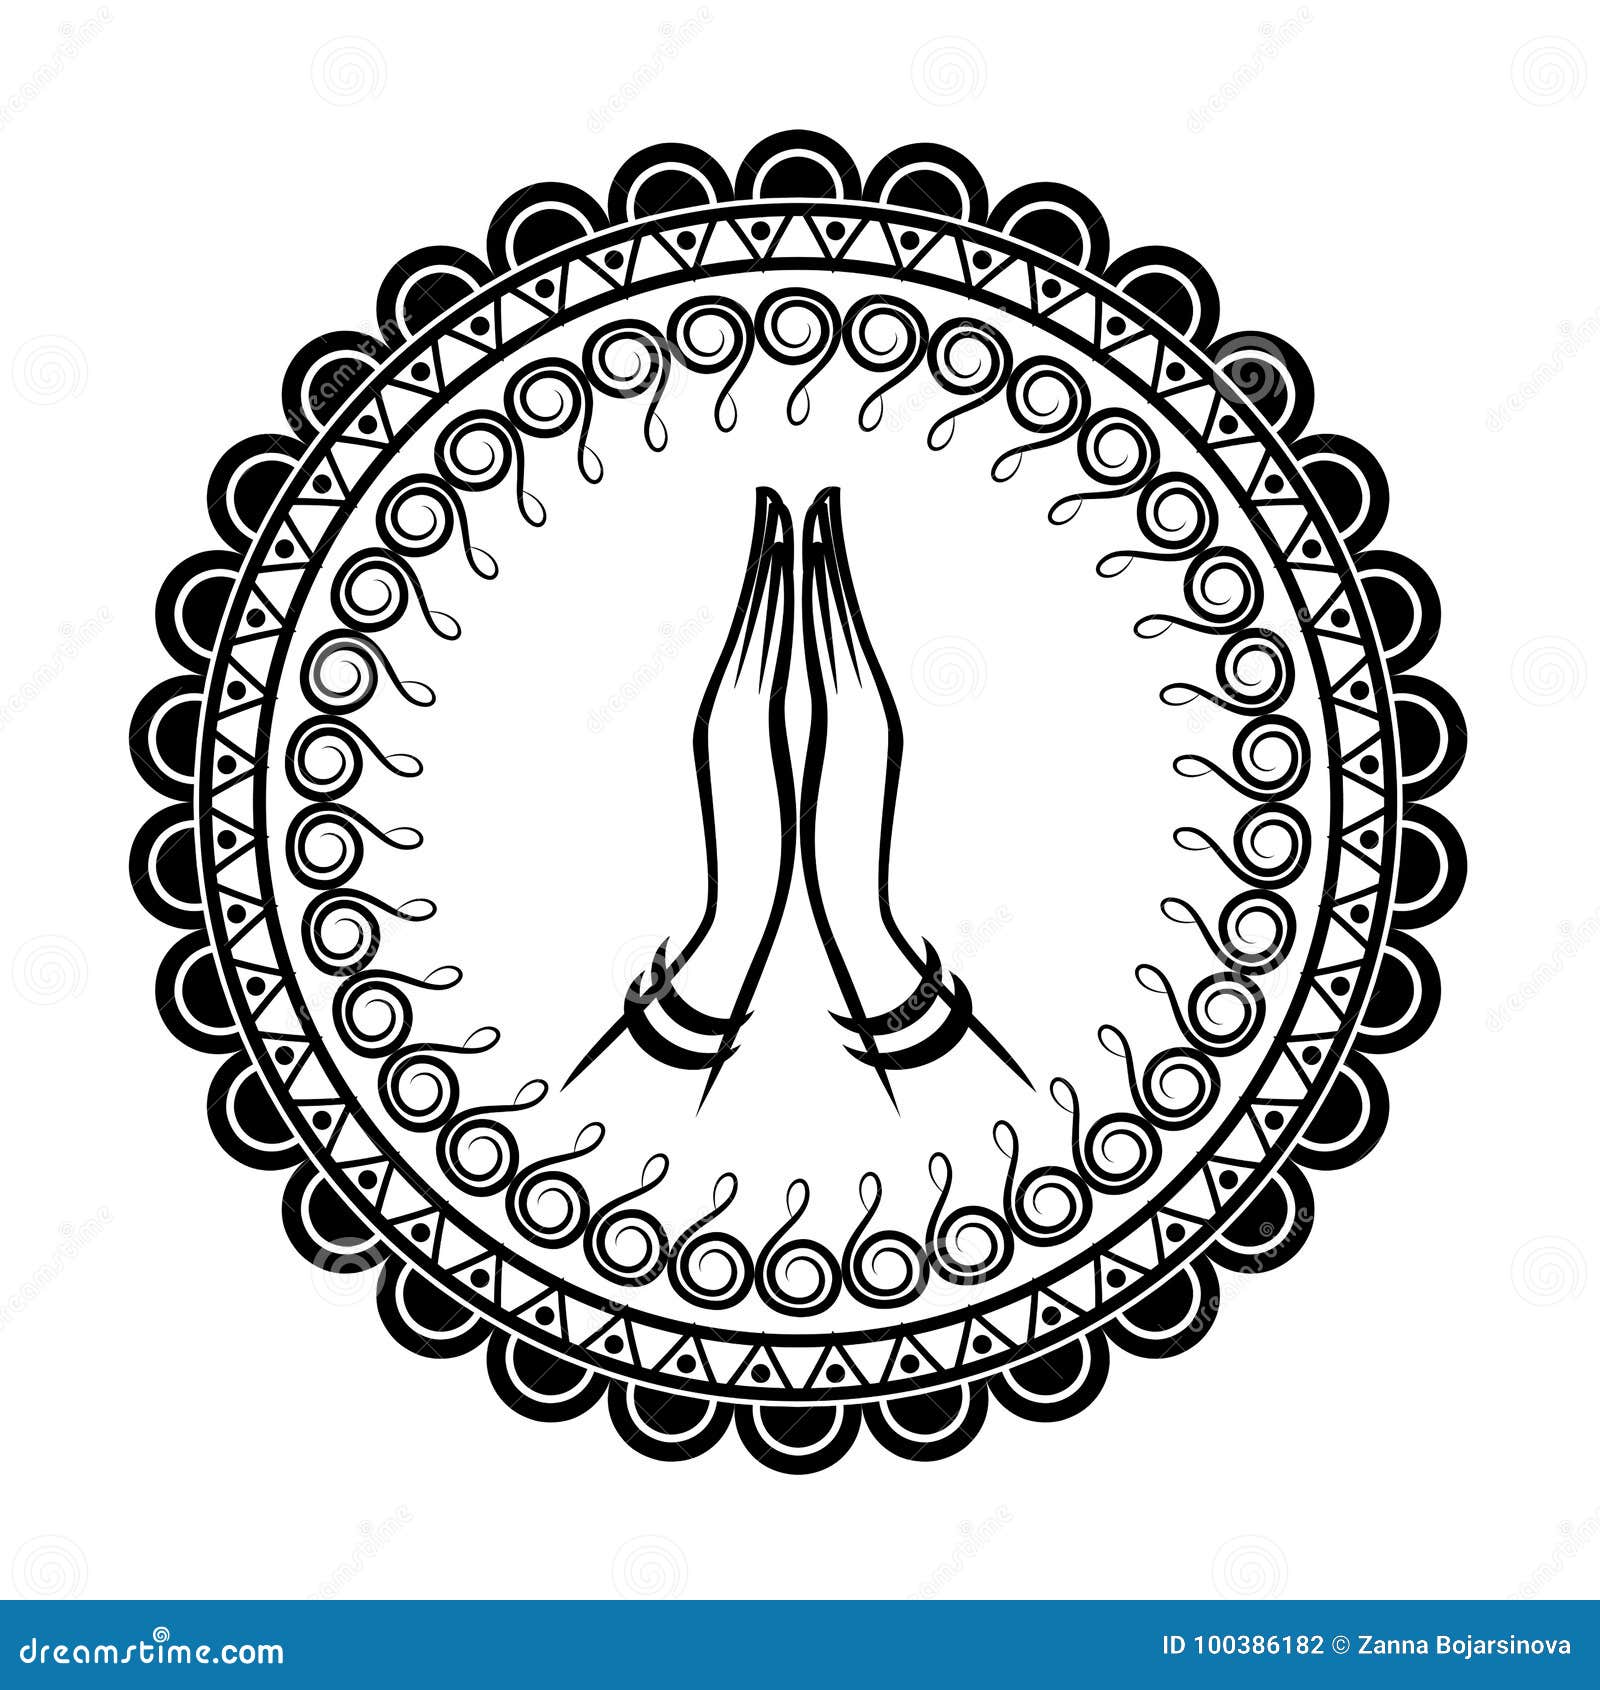 Download Praying Hands With Decorative Indian Ornament Mandala ...